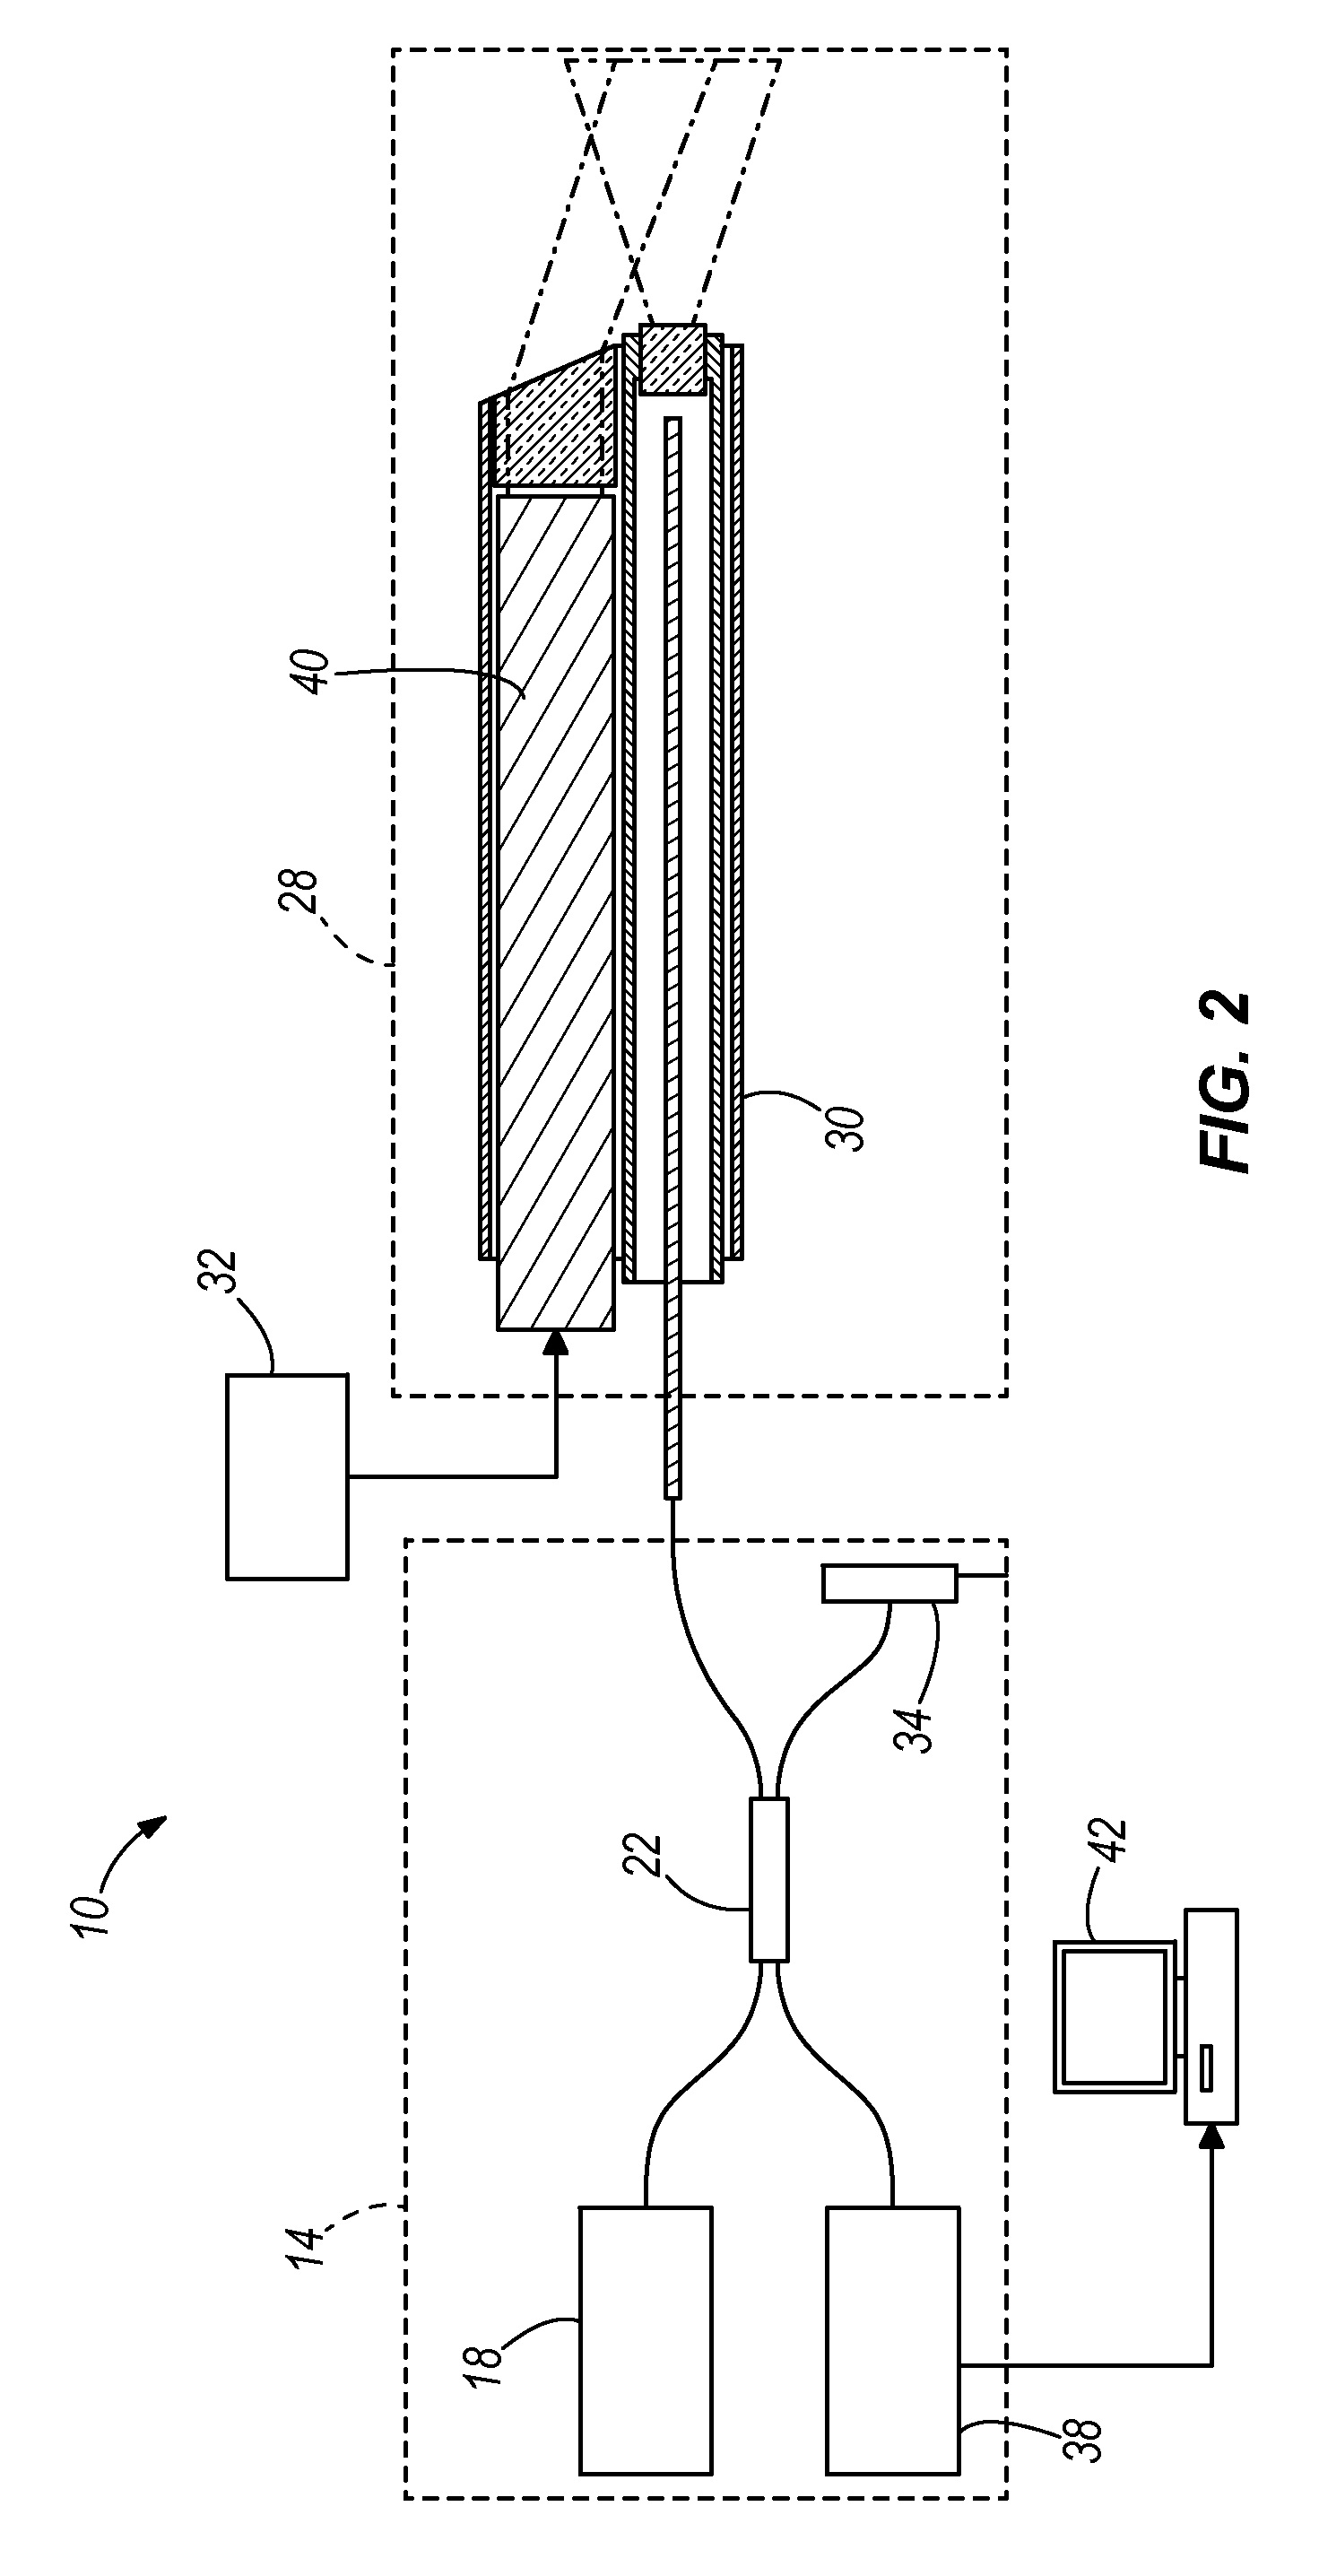 Apparatus and method for real-time imaging and monitoring of an electrosurgical procedure